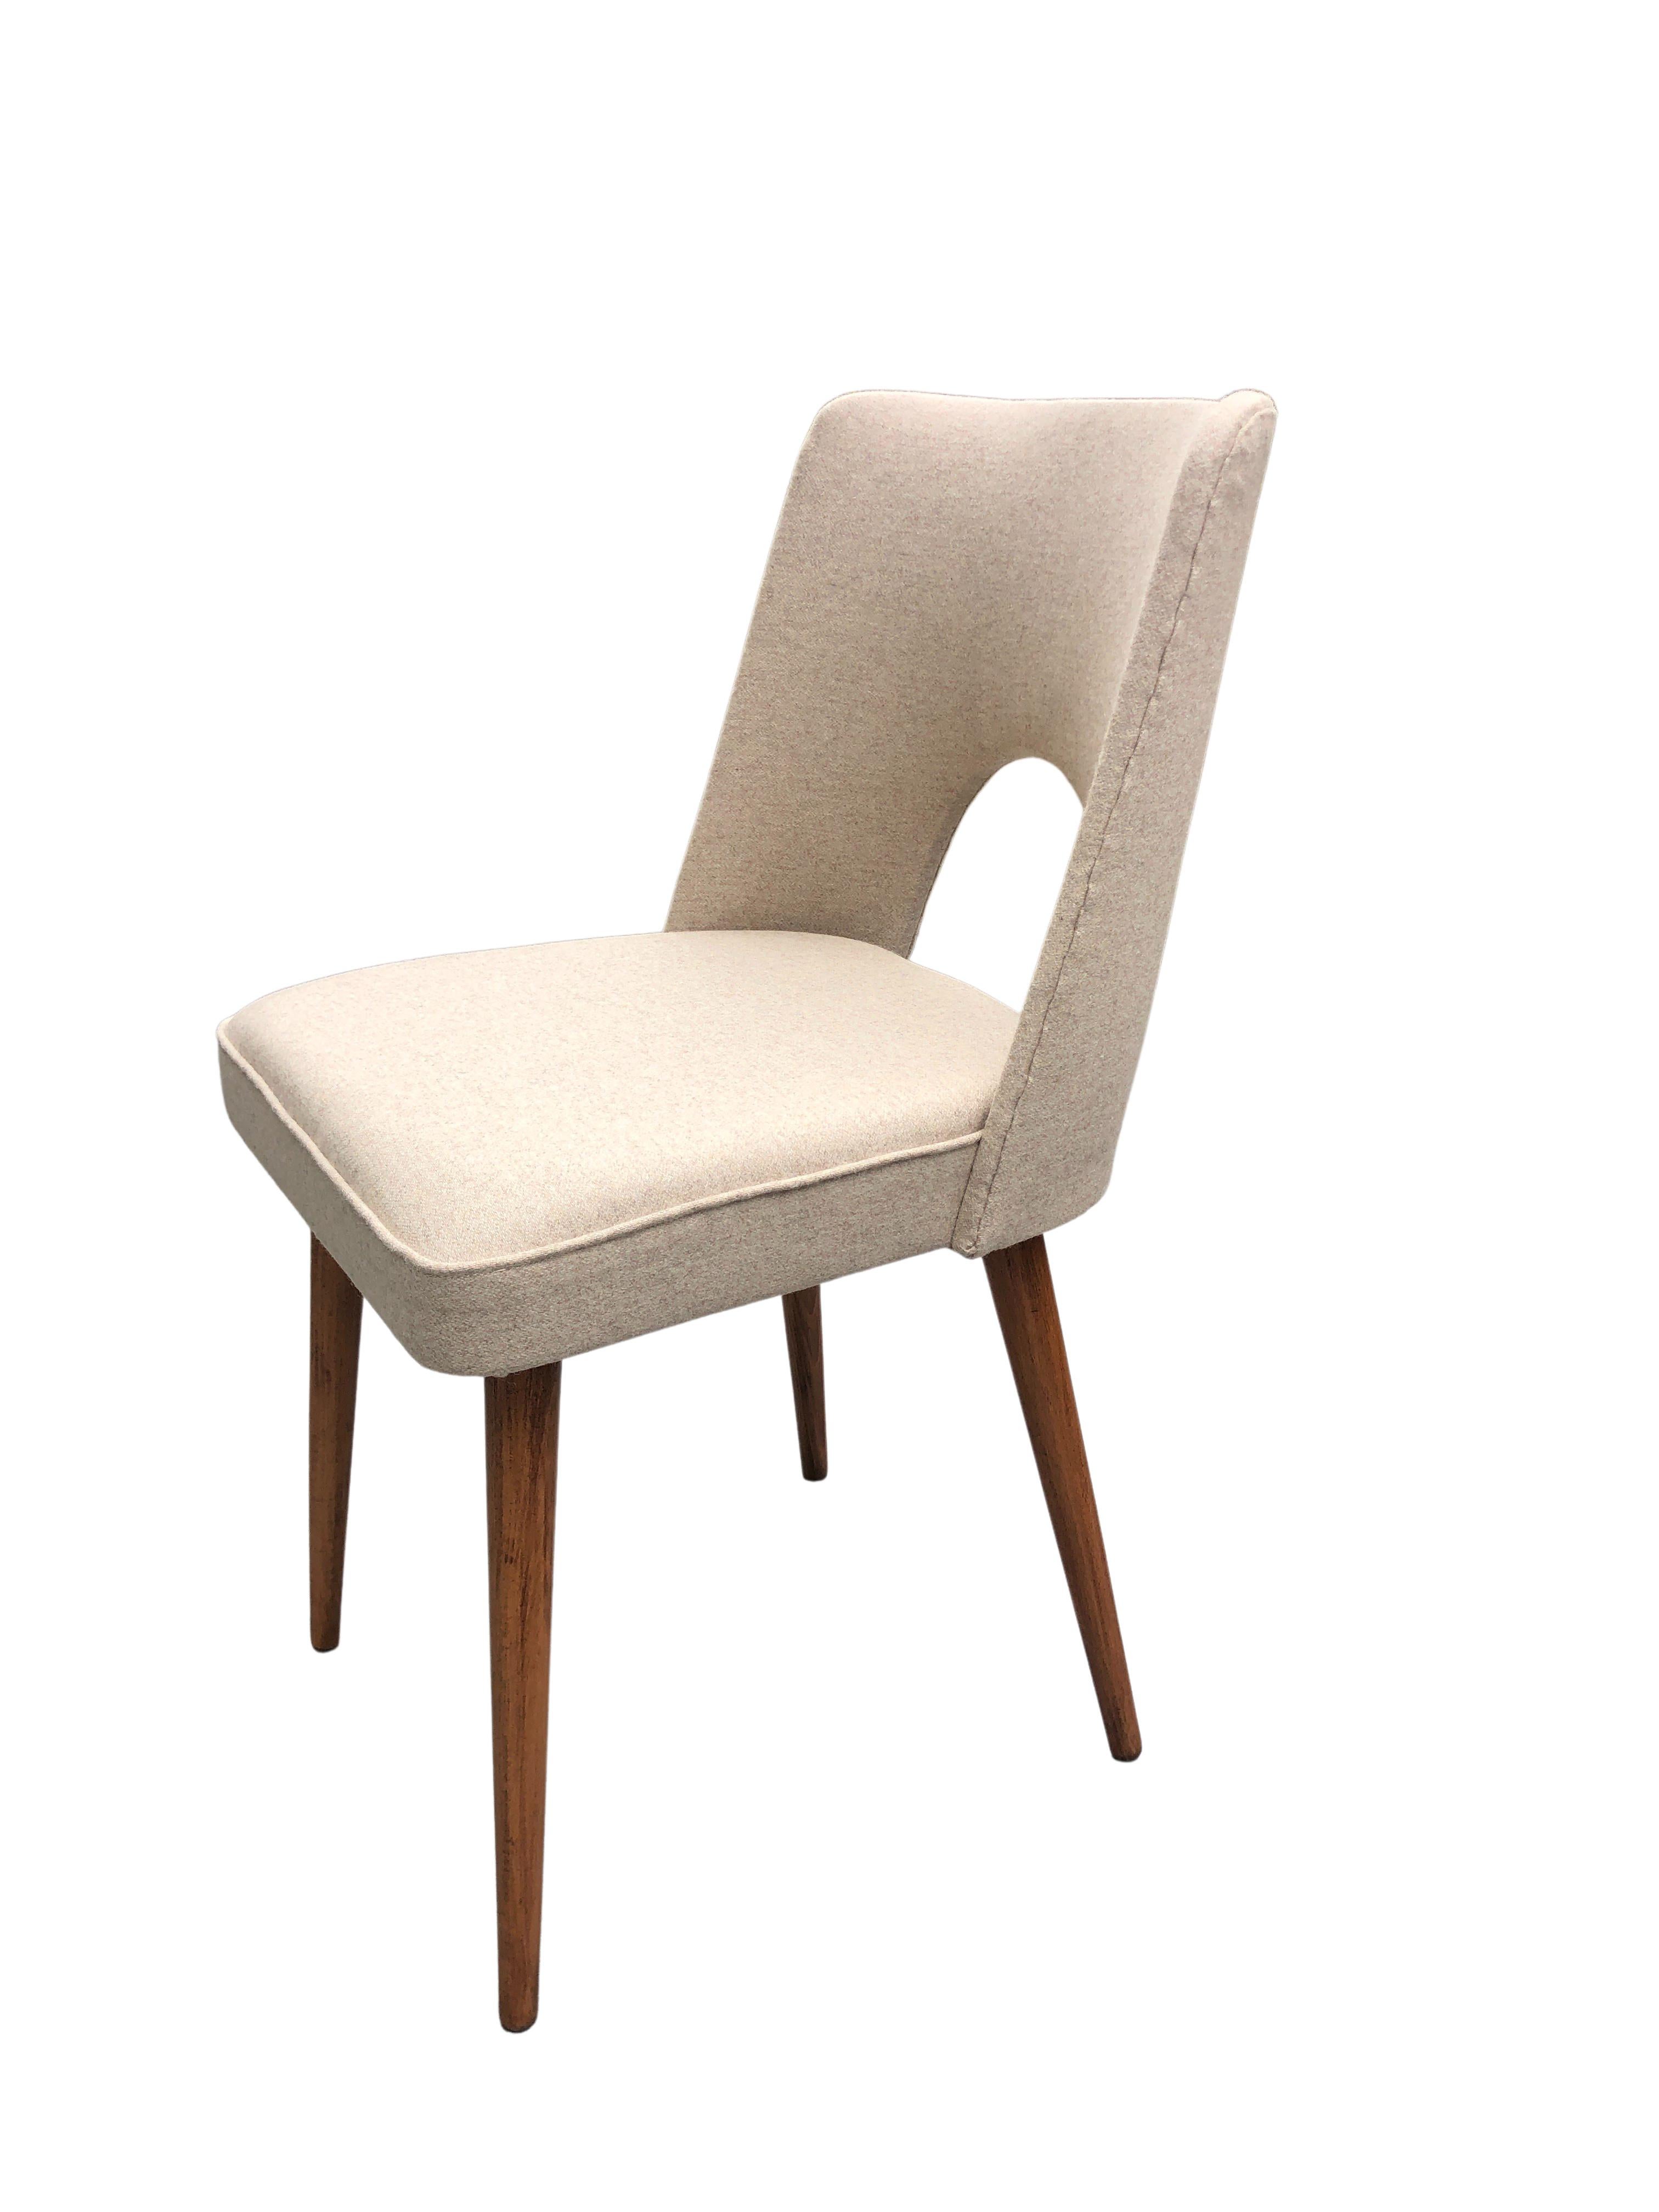 Mid-Century Modern Beige Wool Shell Dining Chair by Lesniewski, 1960s For Sale